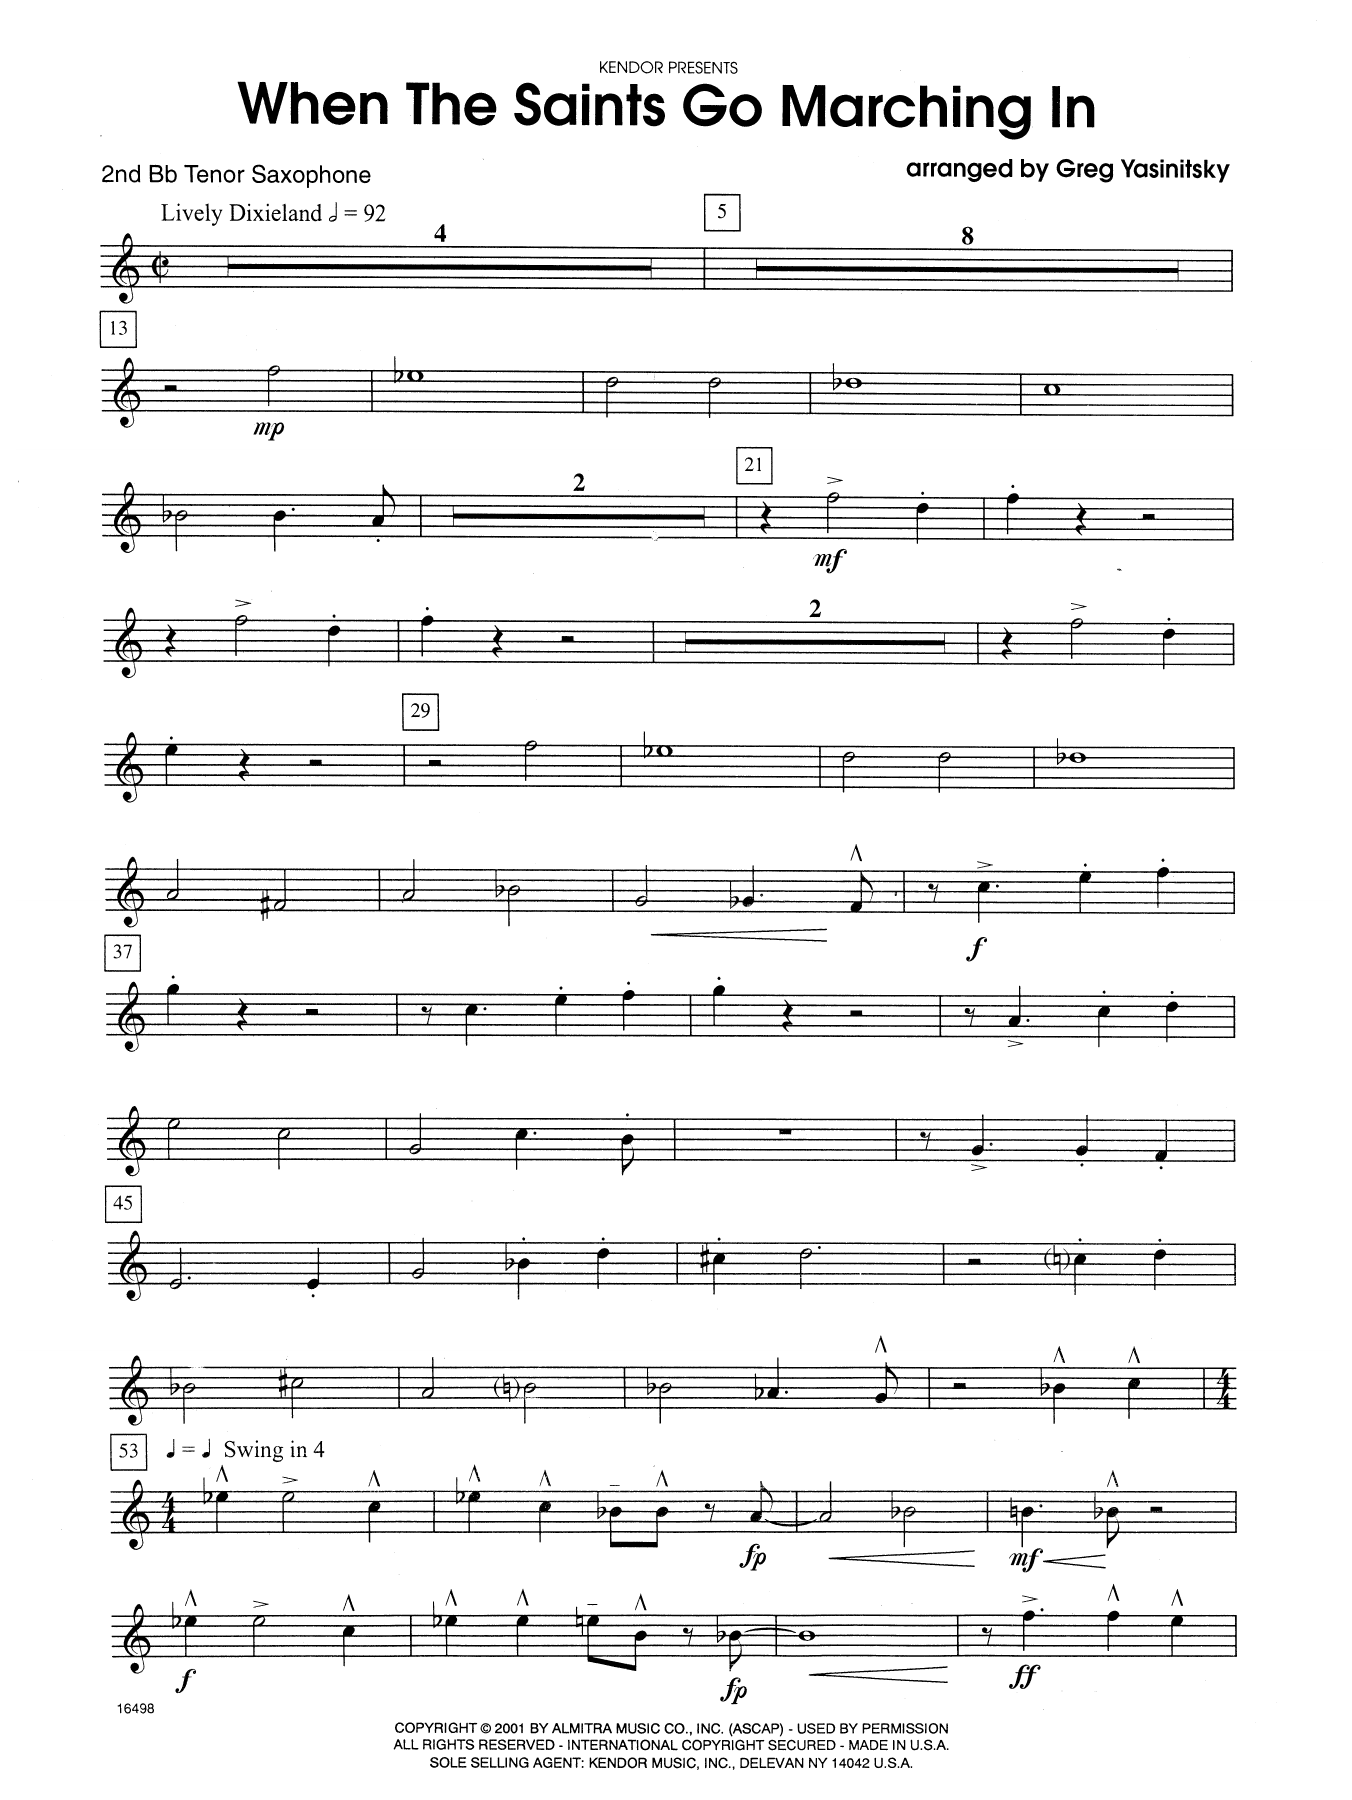 Download Gregory Yasinitsky When the Saints Go Marching In - 2nd Bb Sheet Music